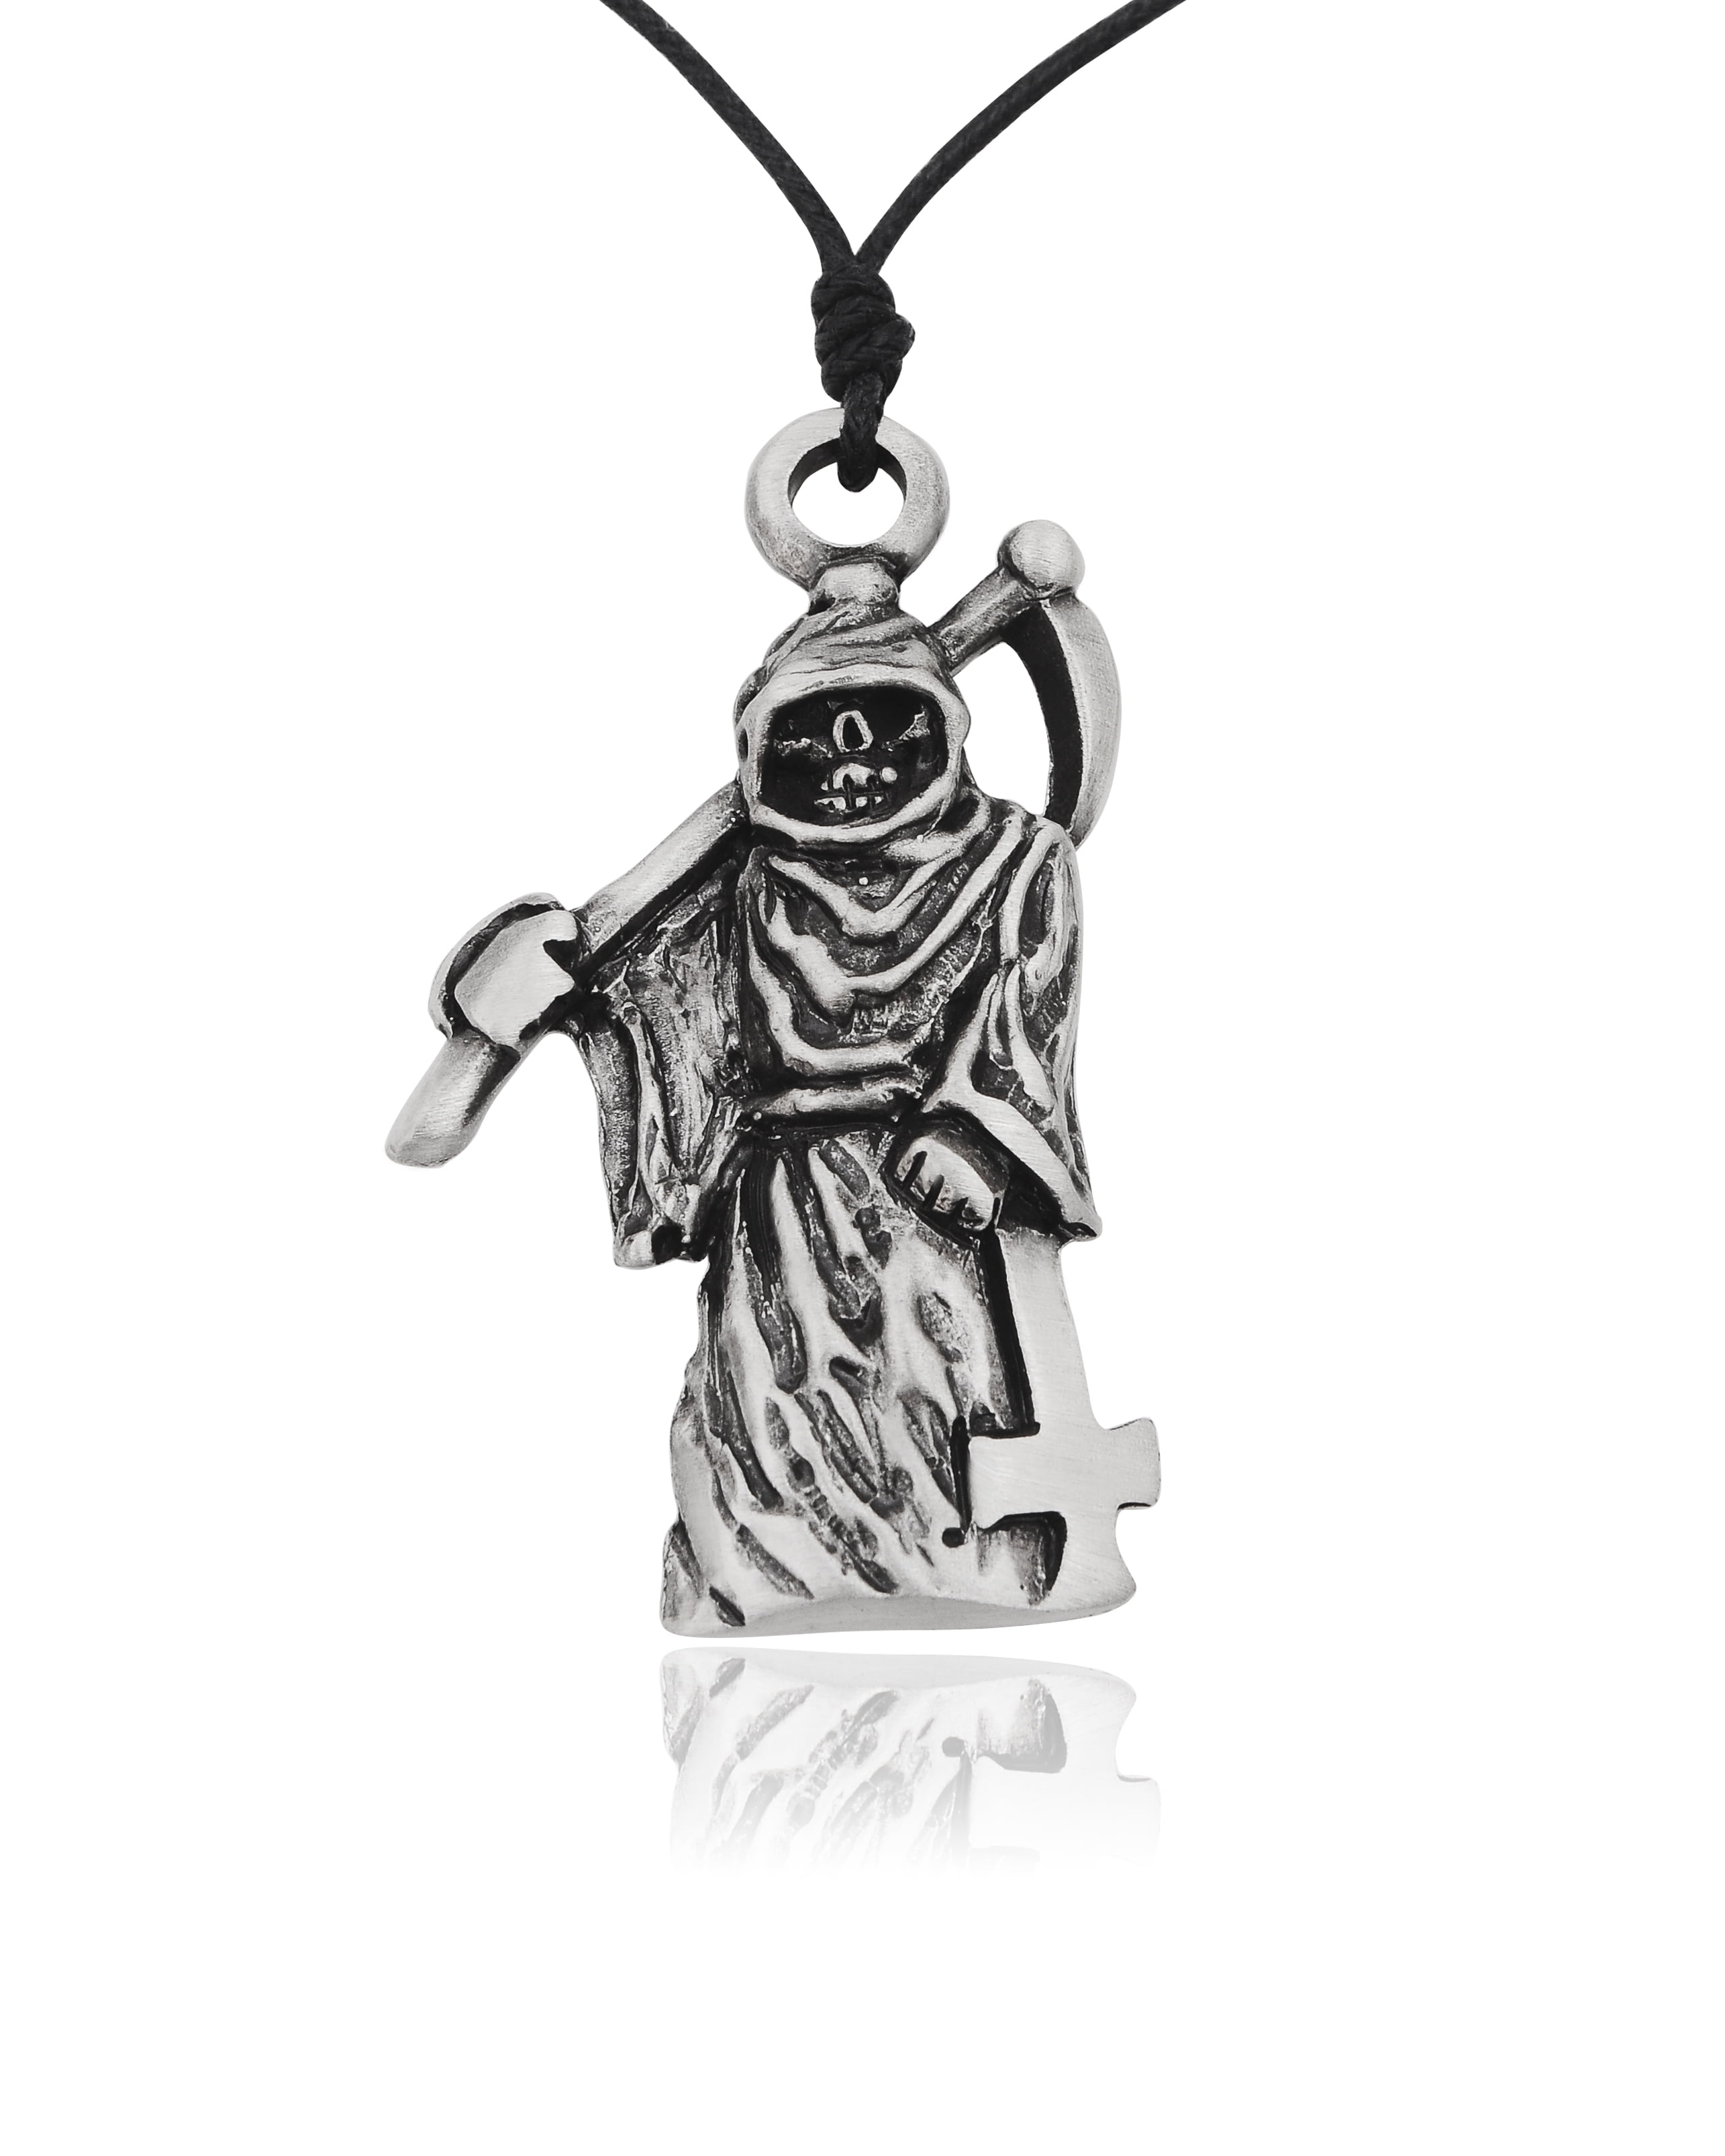 Grim Reaper Silver Pewter Charm Necklace Pendant Jewelry 